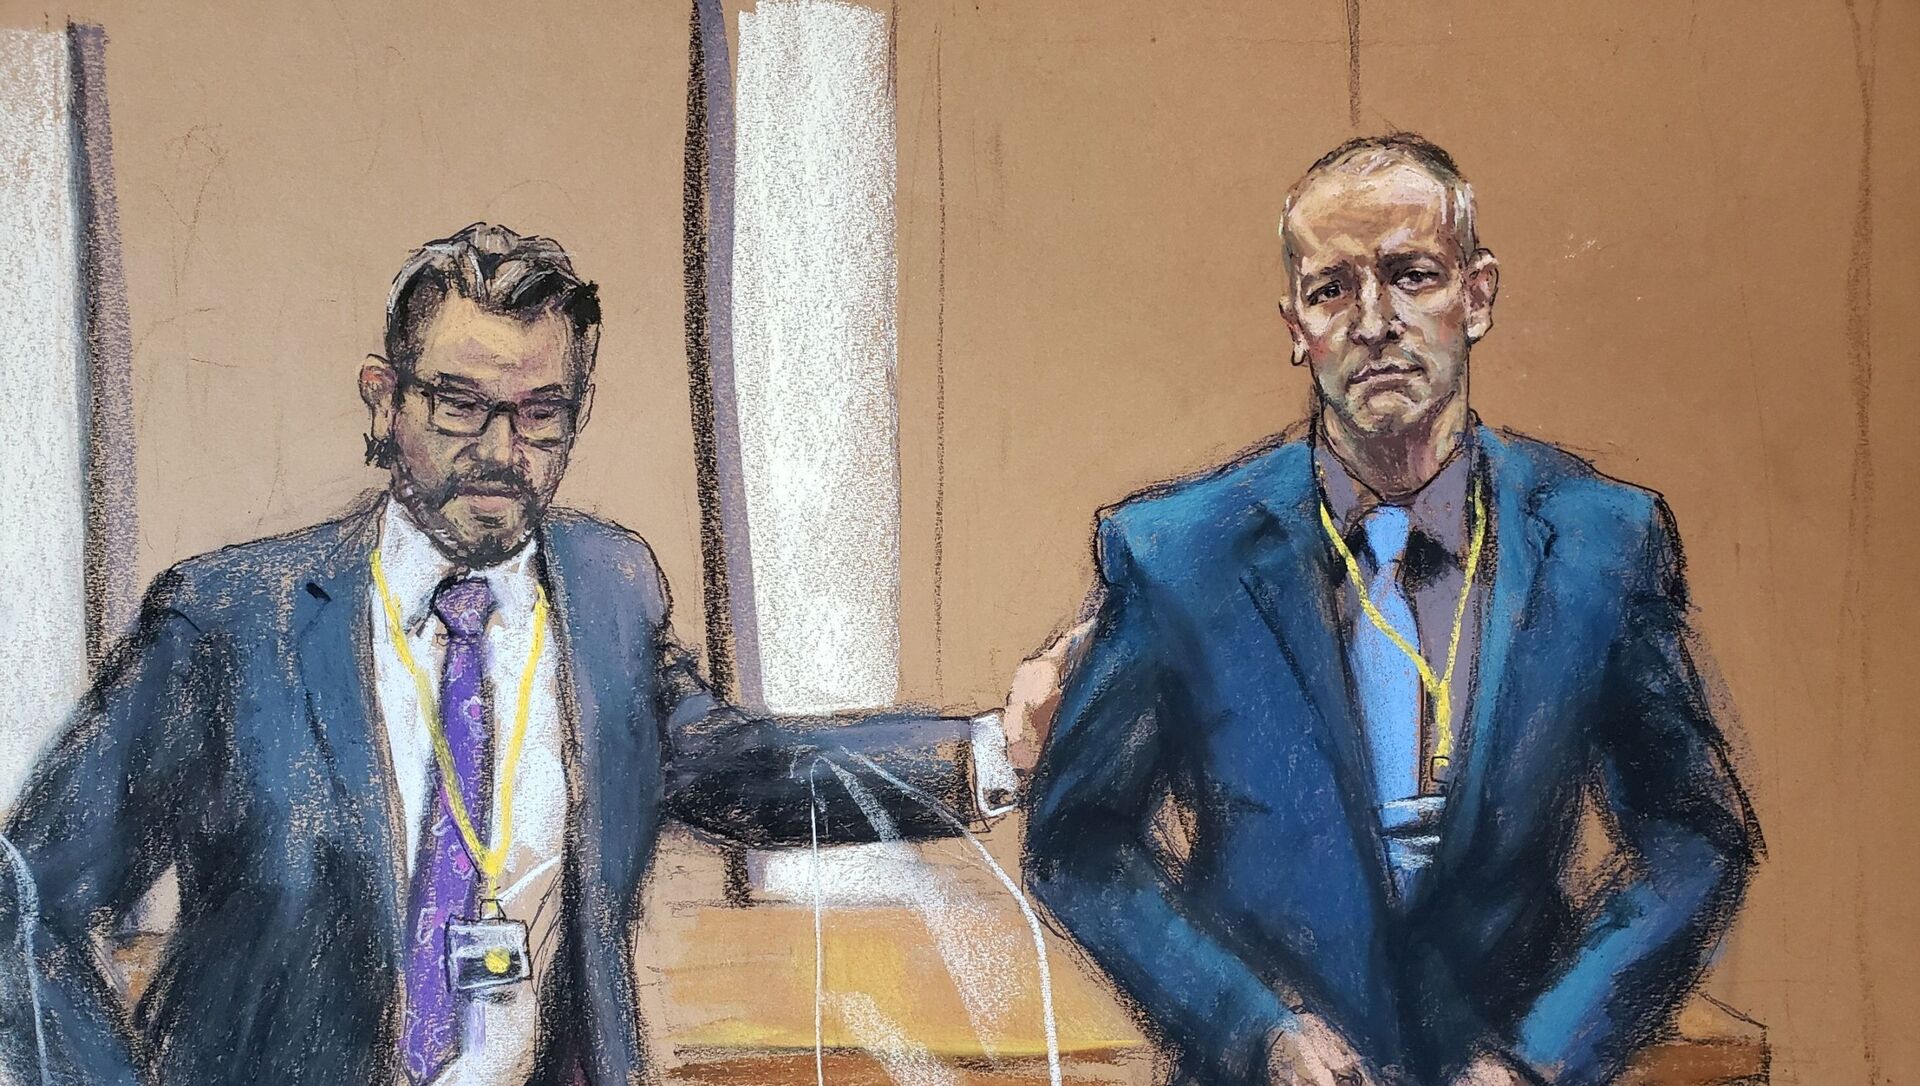 Defence attorney Eric Nelson introduces Derek Chauvin, the former Minneapolis police officer facing murder charges in the death of George Floyd, to potential jurors during jury selection in his trial in Minneapolis, Minnesota, U.S., March 15, 2021 in this courtroom sketch from a video feed of the proceedings. - Sputnik International, 1920, 06.04.2021